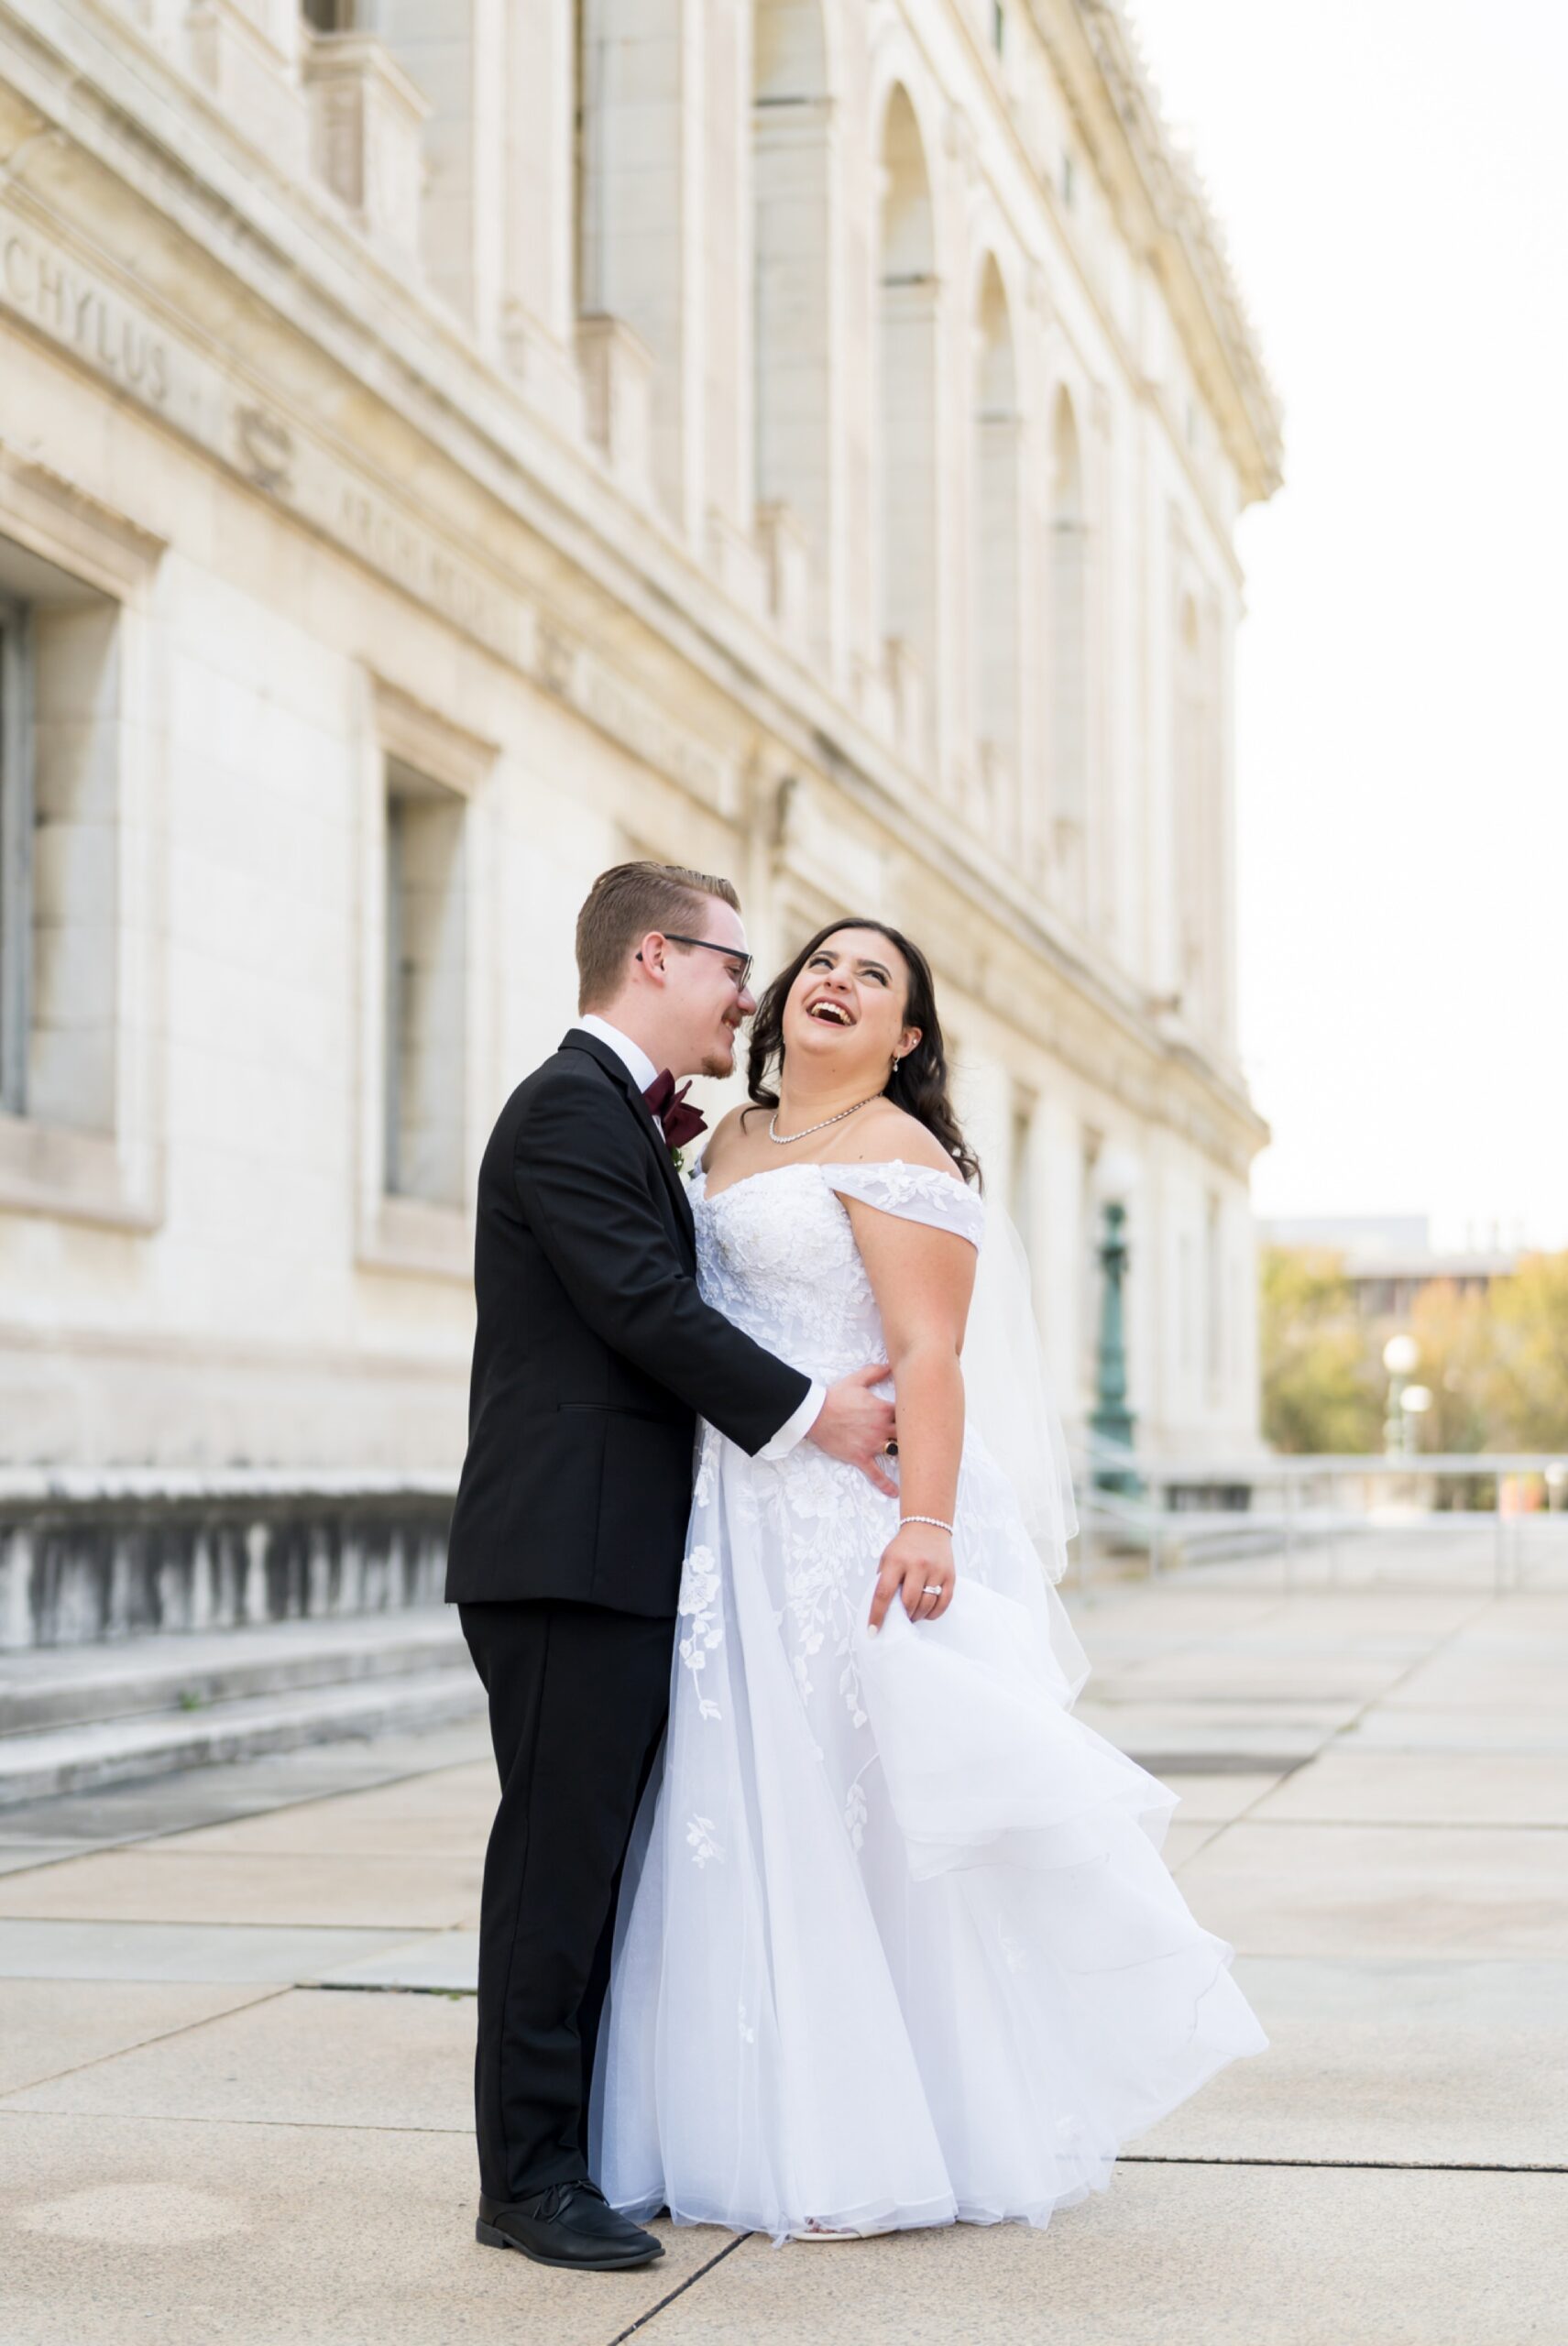 A bride and groom laugh on their wedding day at the Detroit Public Library.  